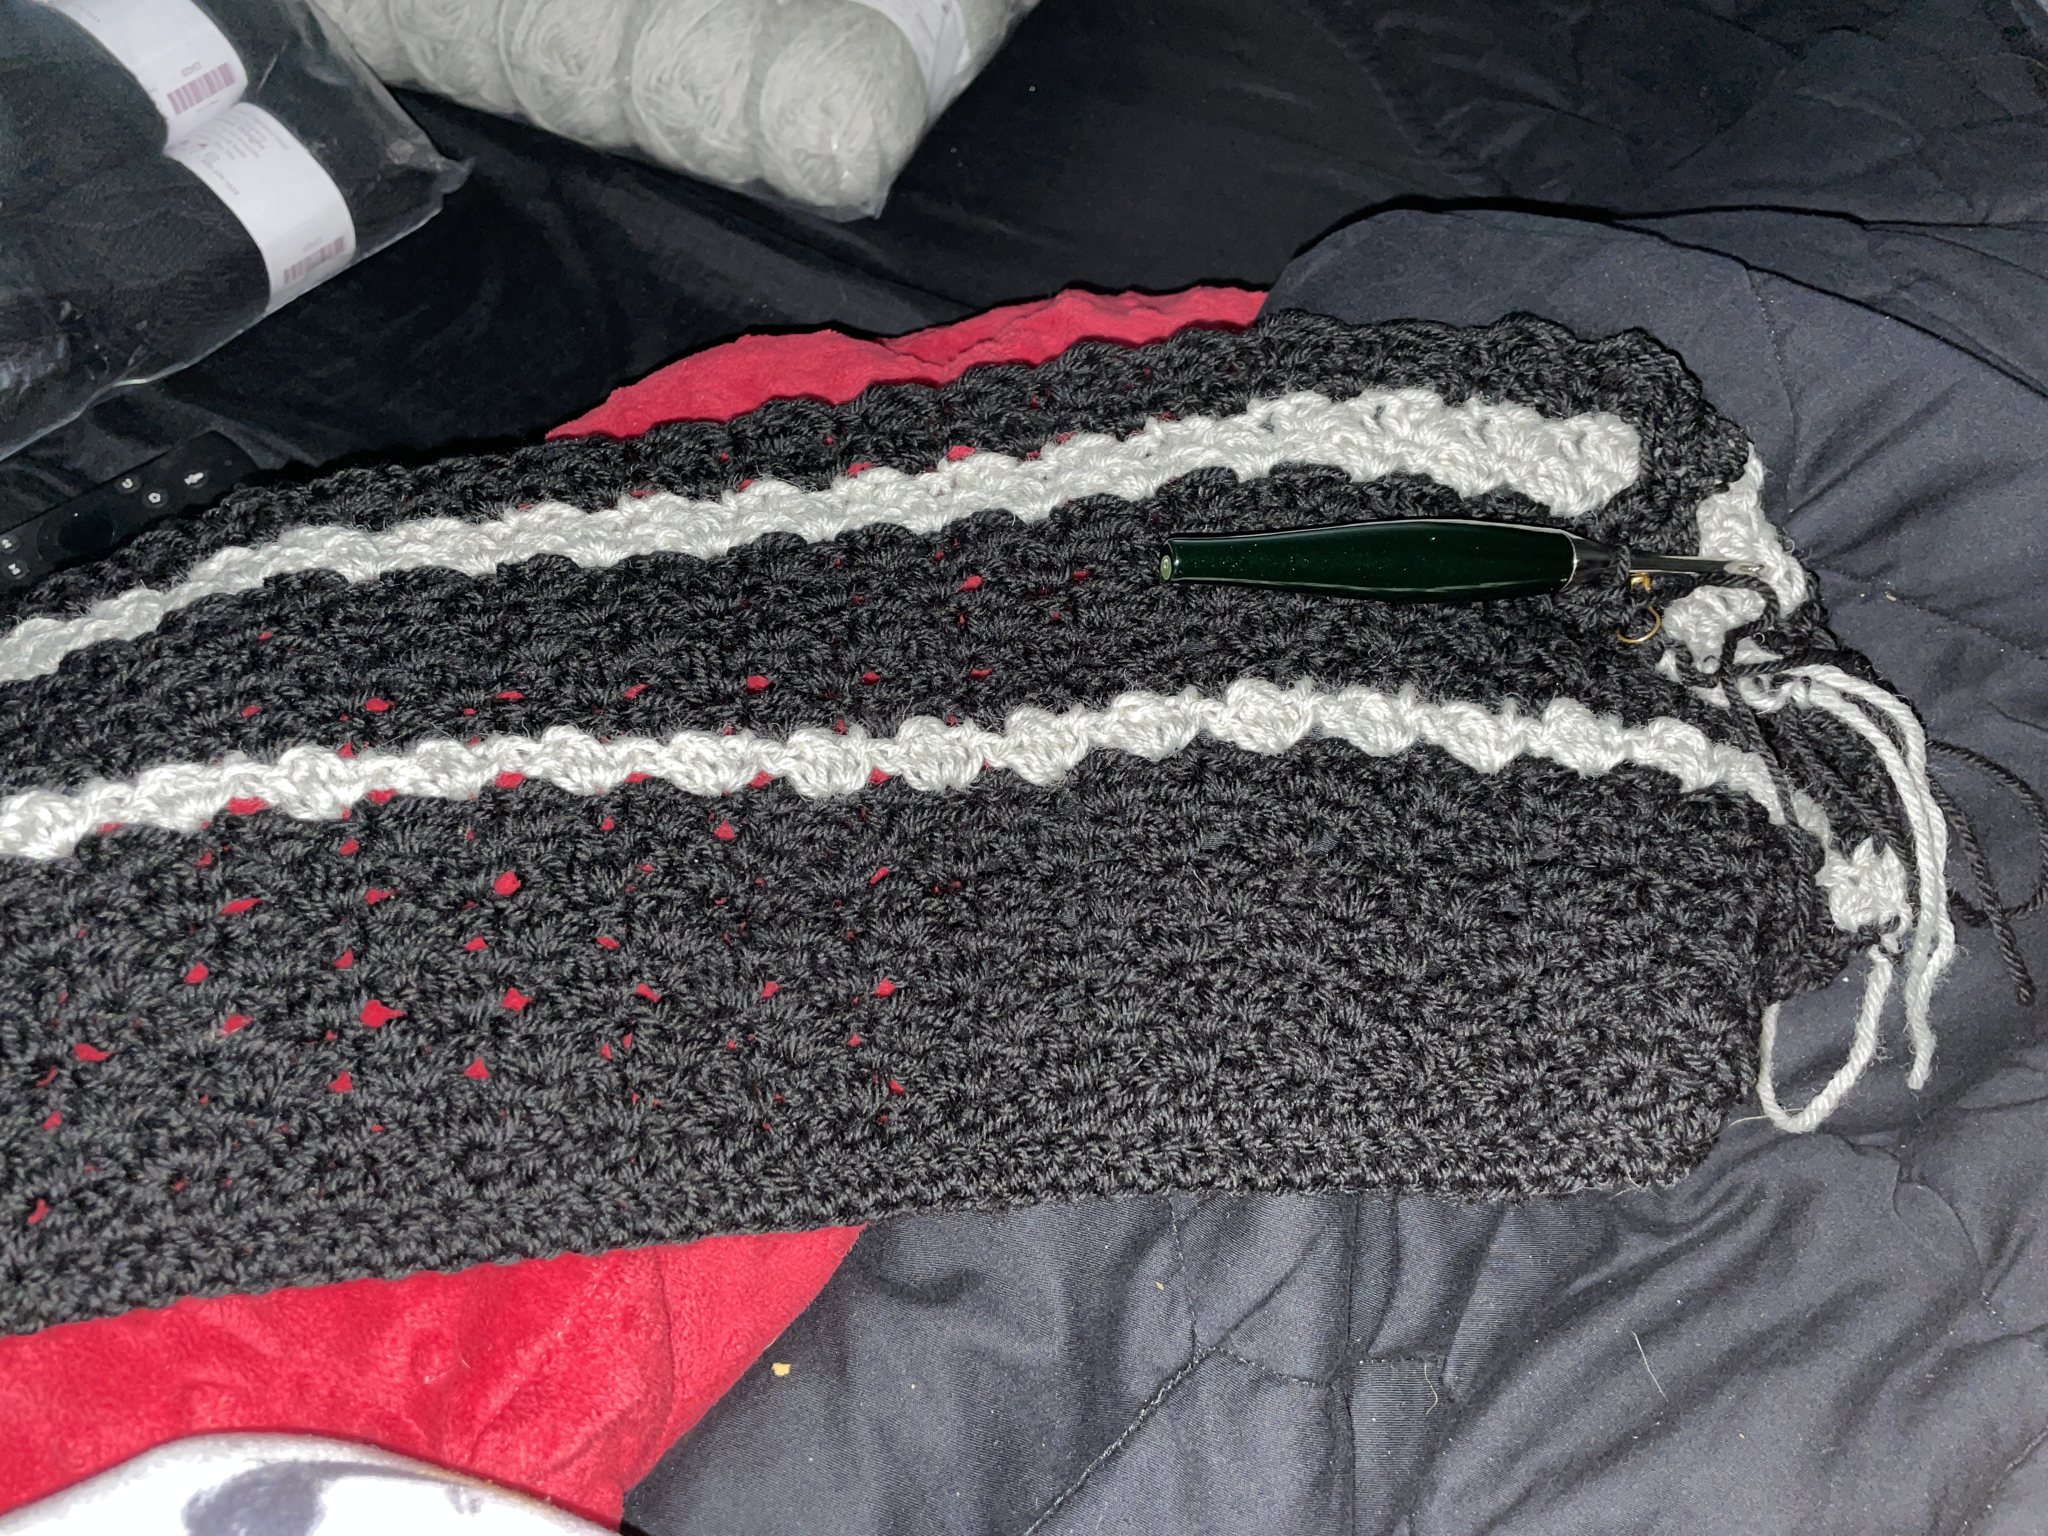 Working on the cardigan